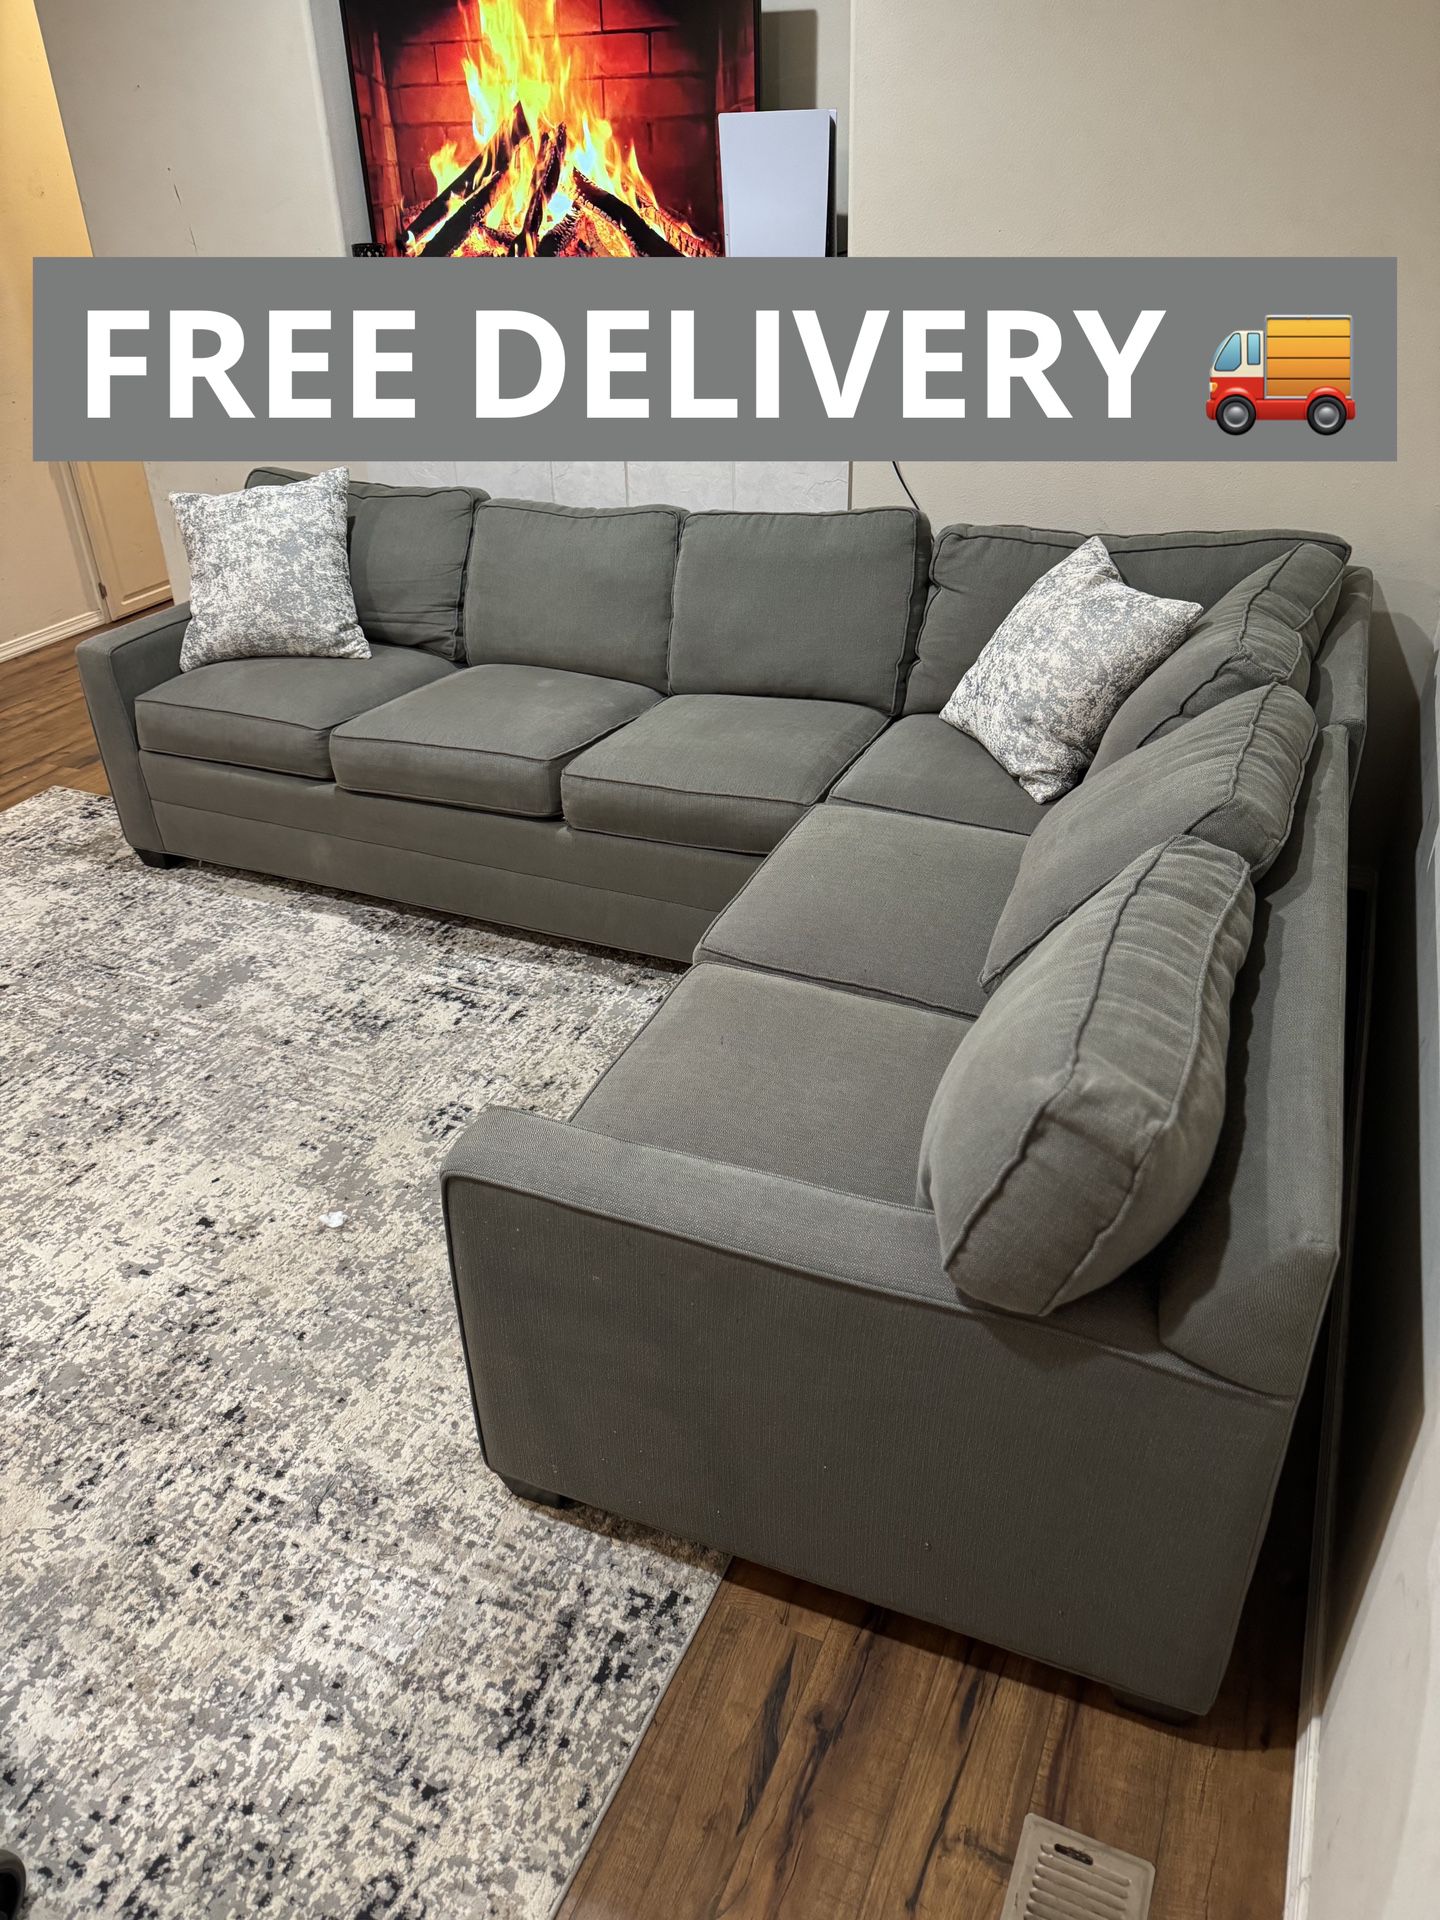 Large Gray Sectional Couch 🛋️- FREE DELIVERY 🚚 LIKE NEW 